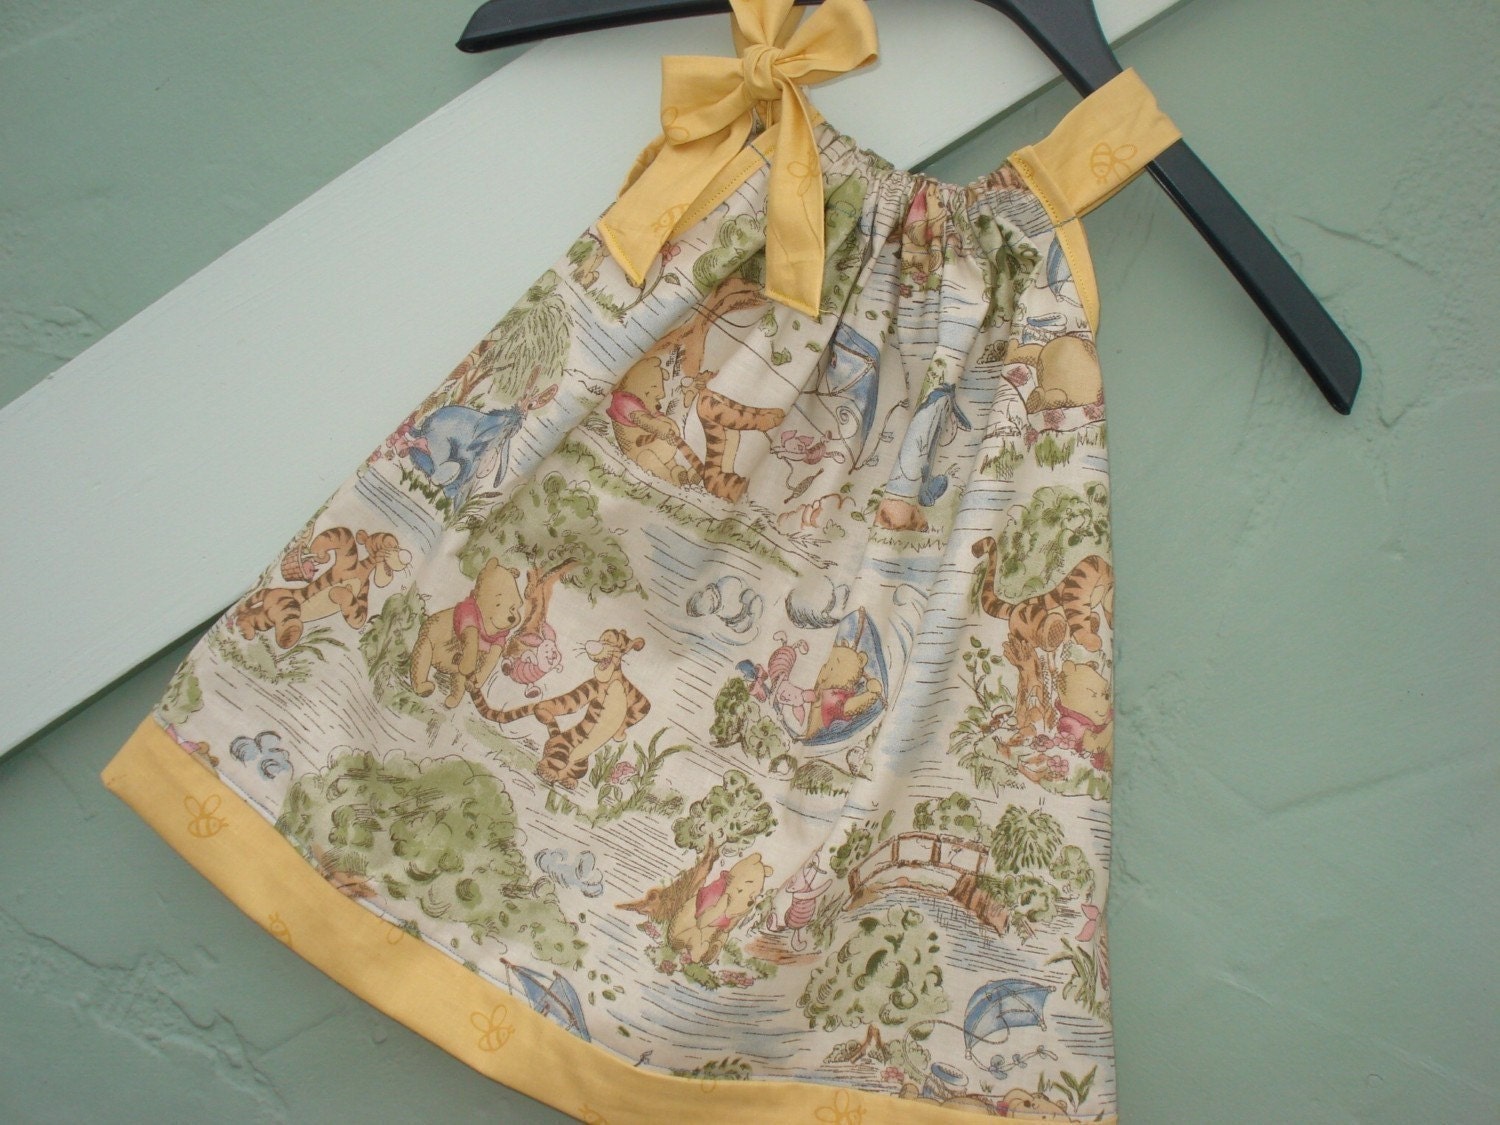 NEW for spring 2010...WINNIE THE POOH and freinds inspired BOUTIQUE spring/summer pillowcase dress with FREE matching ruffle socks